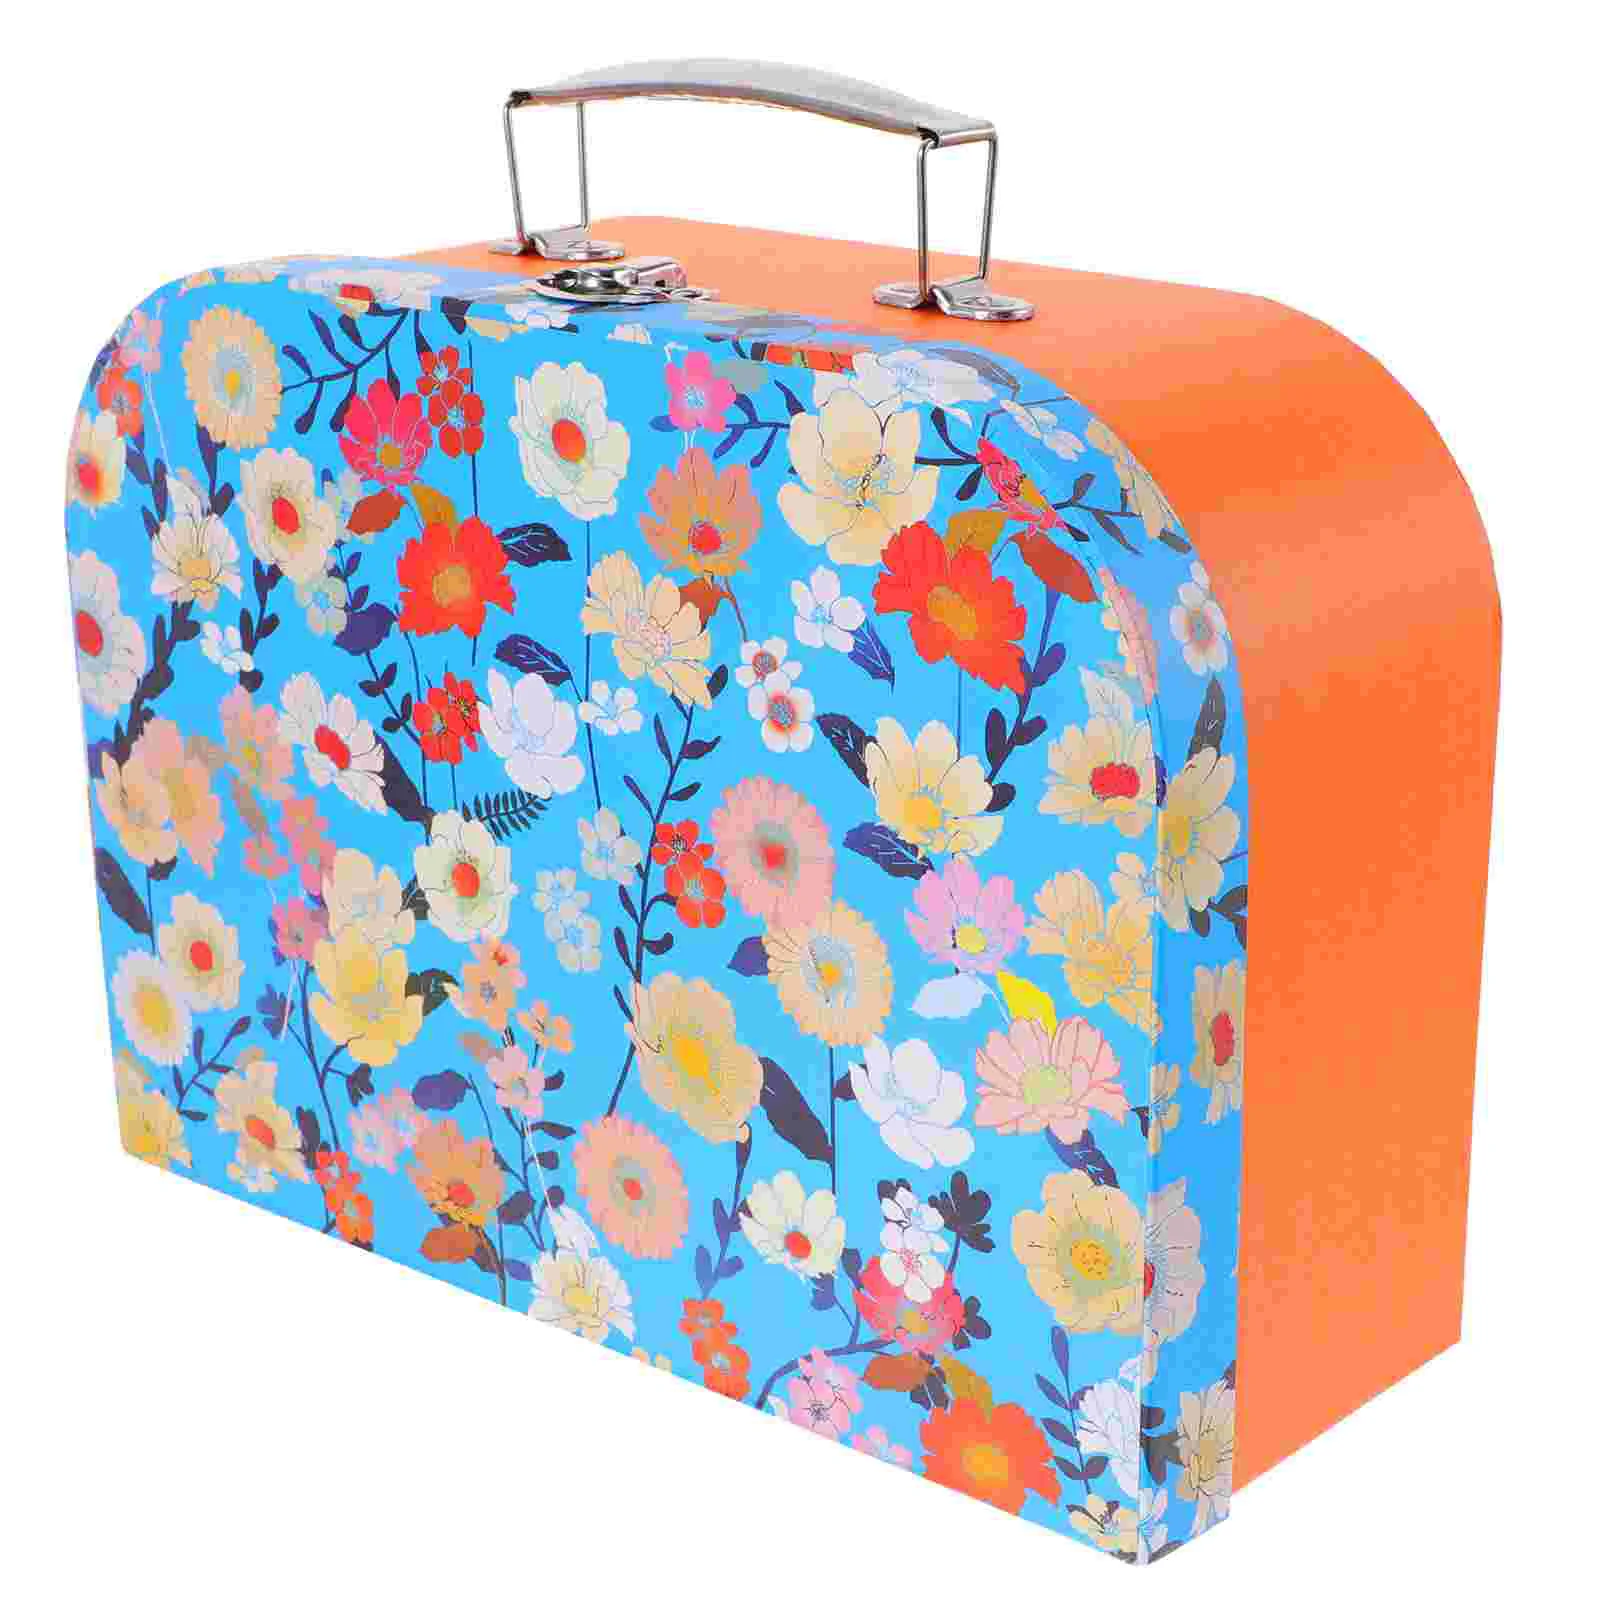 

Storage Suitcase Mini Suitcases Party Favors Paperboard Gift Clutch Makeup Bag Decorate Blue Cardboard Sundries Travel